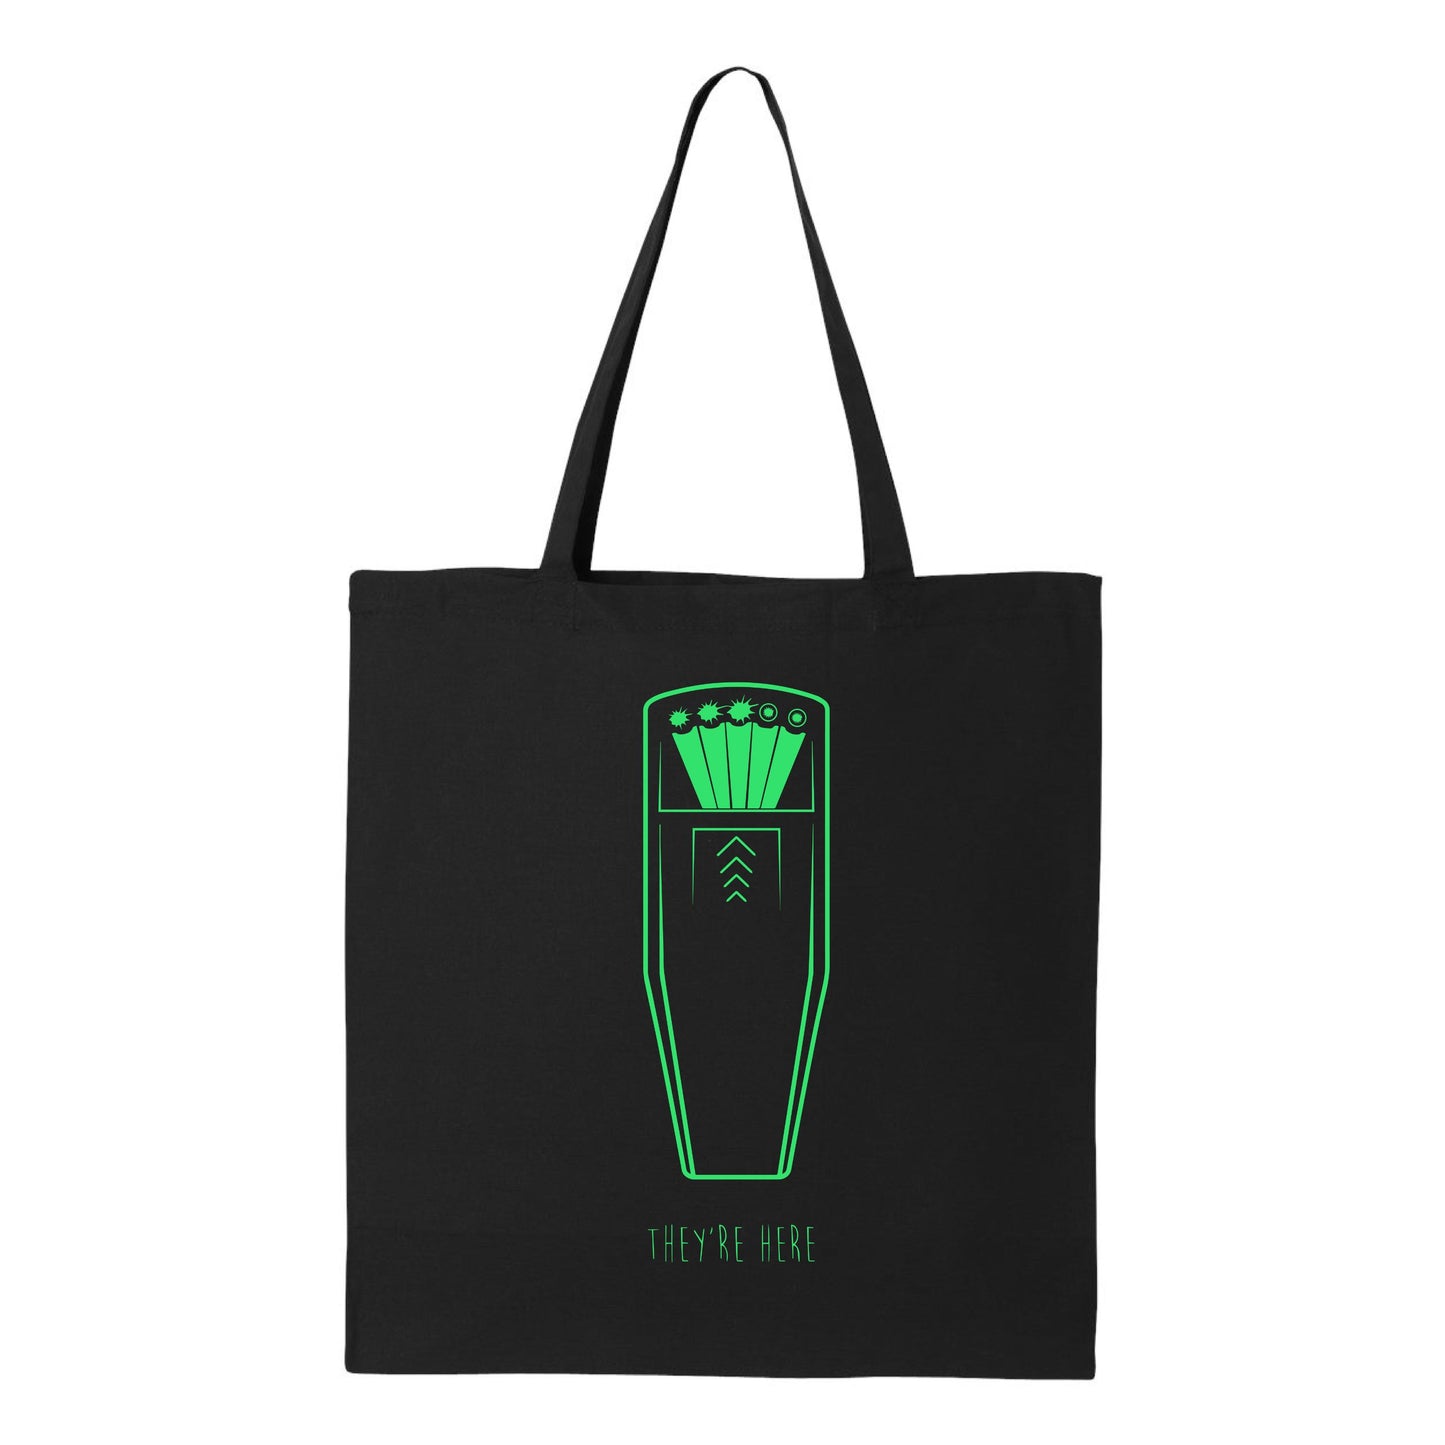 "They're Here" Glow-in-the-dark K2 Tote